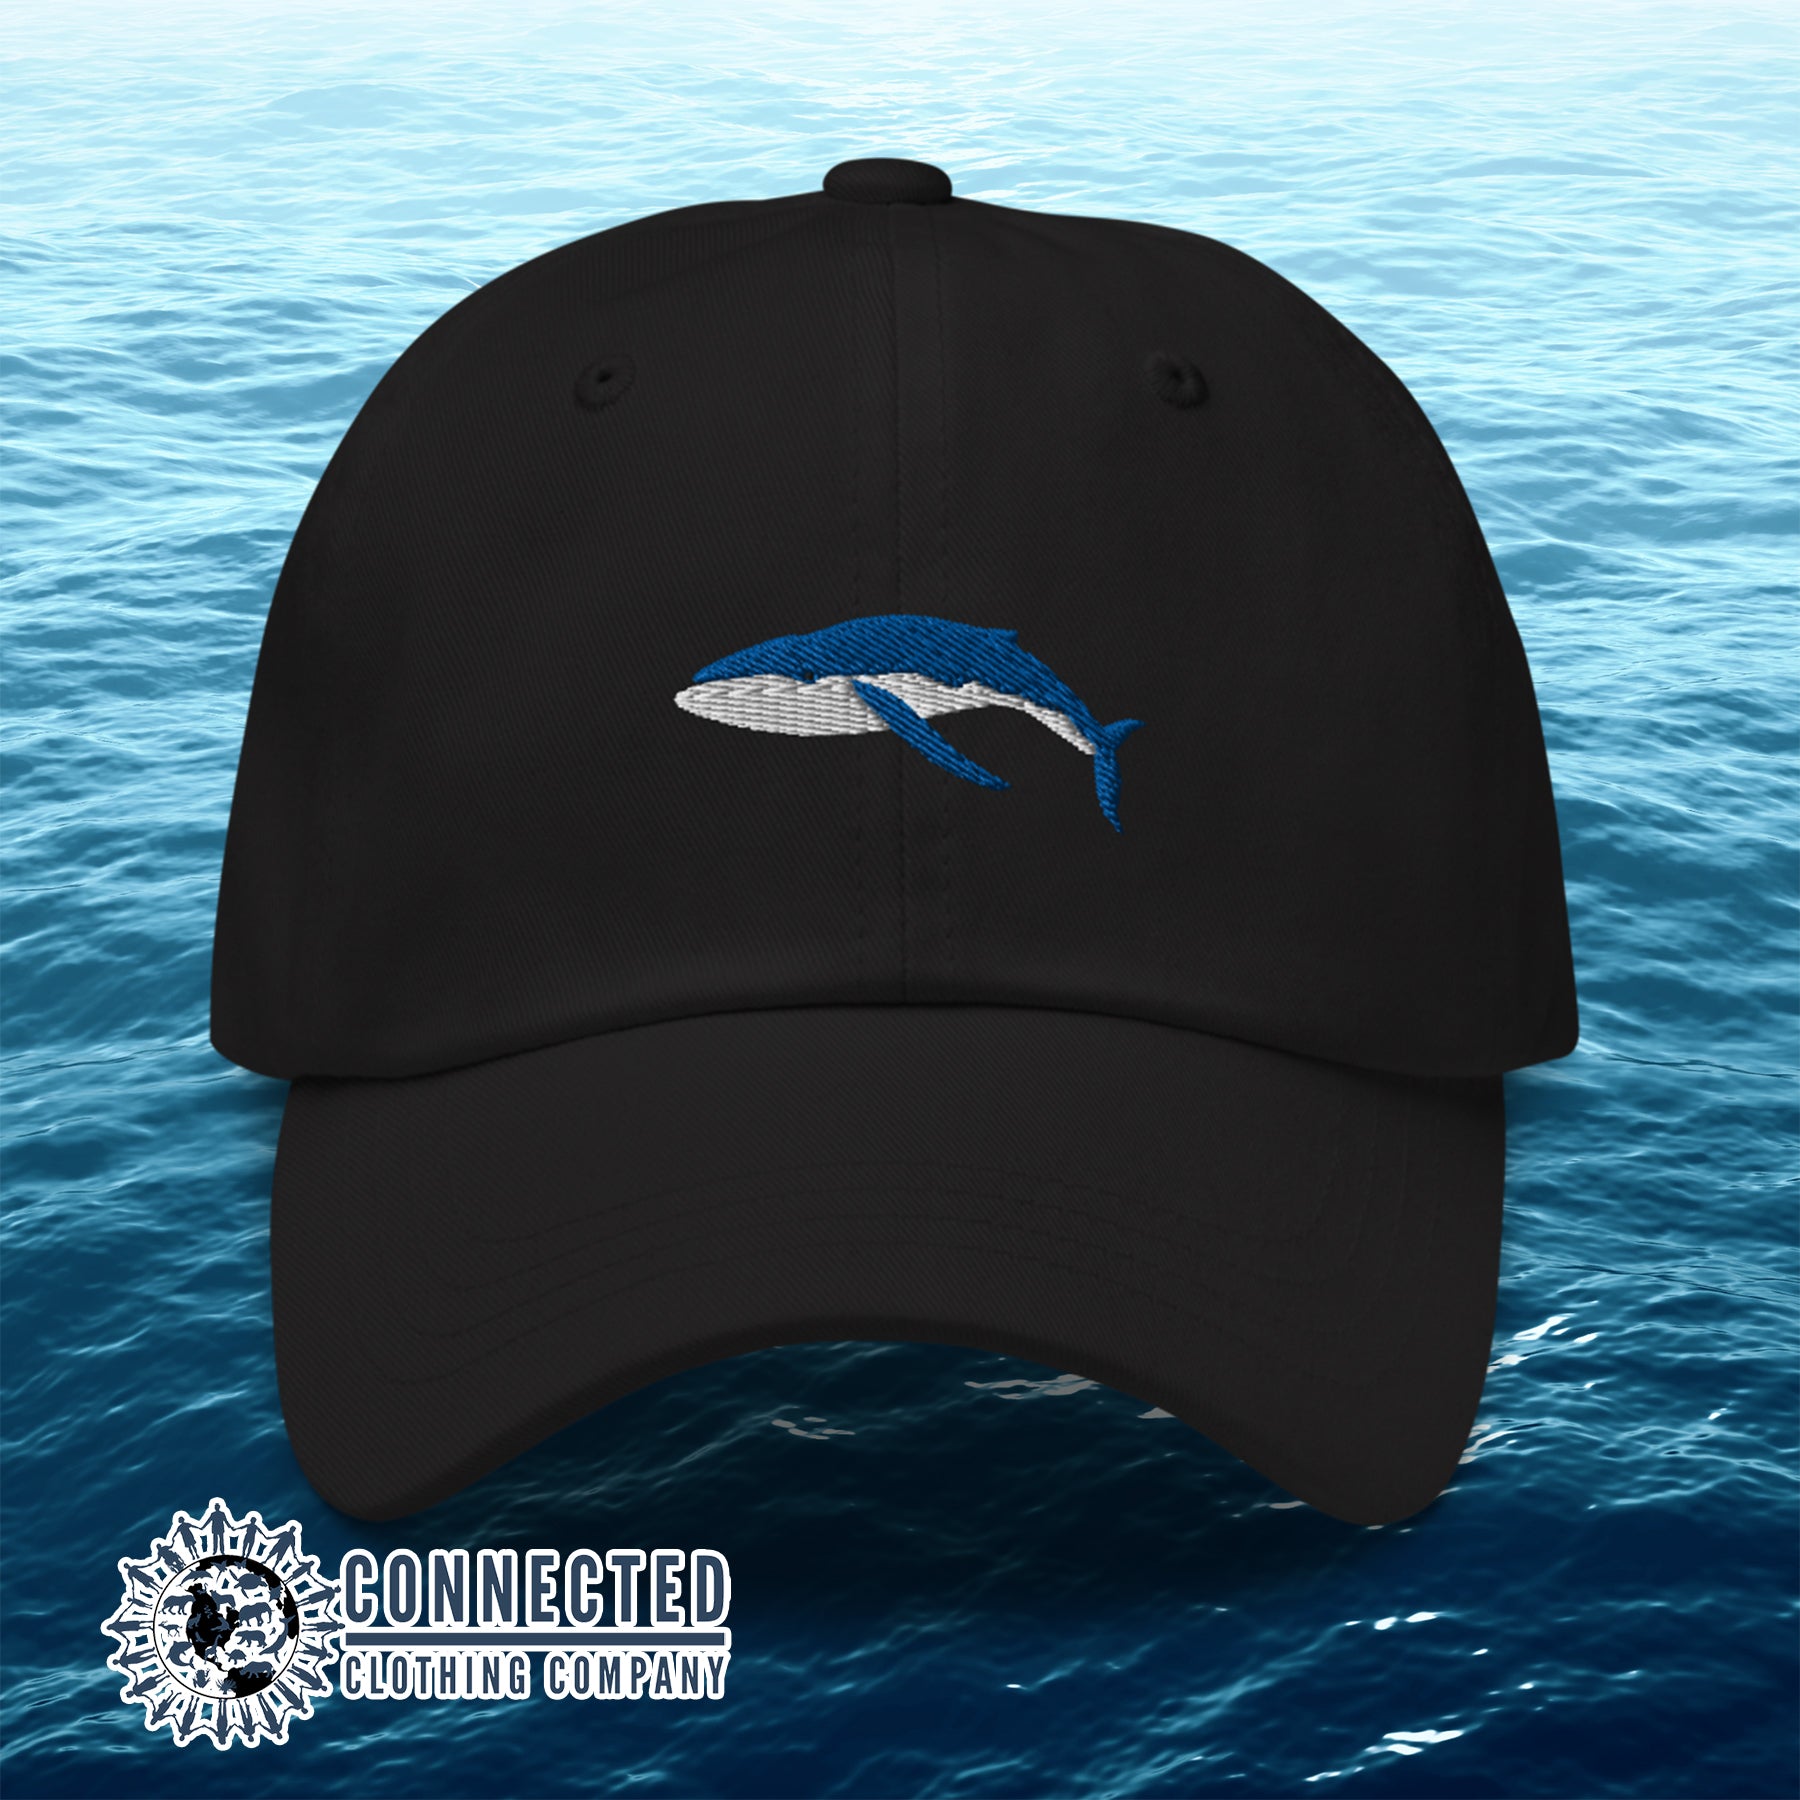 Black Humpback Whale Cotton Cap - sweetsherriloudesigns - 10% of profits donated to Mission Blue ocean conservation